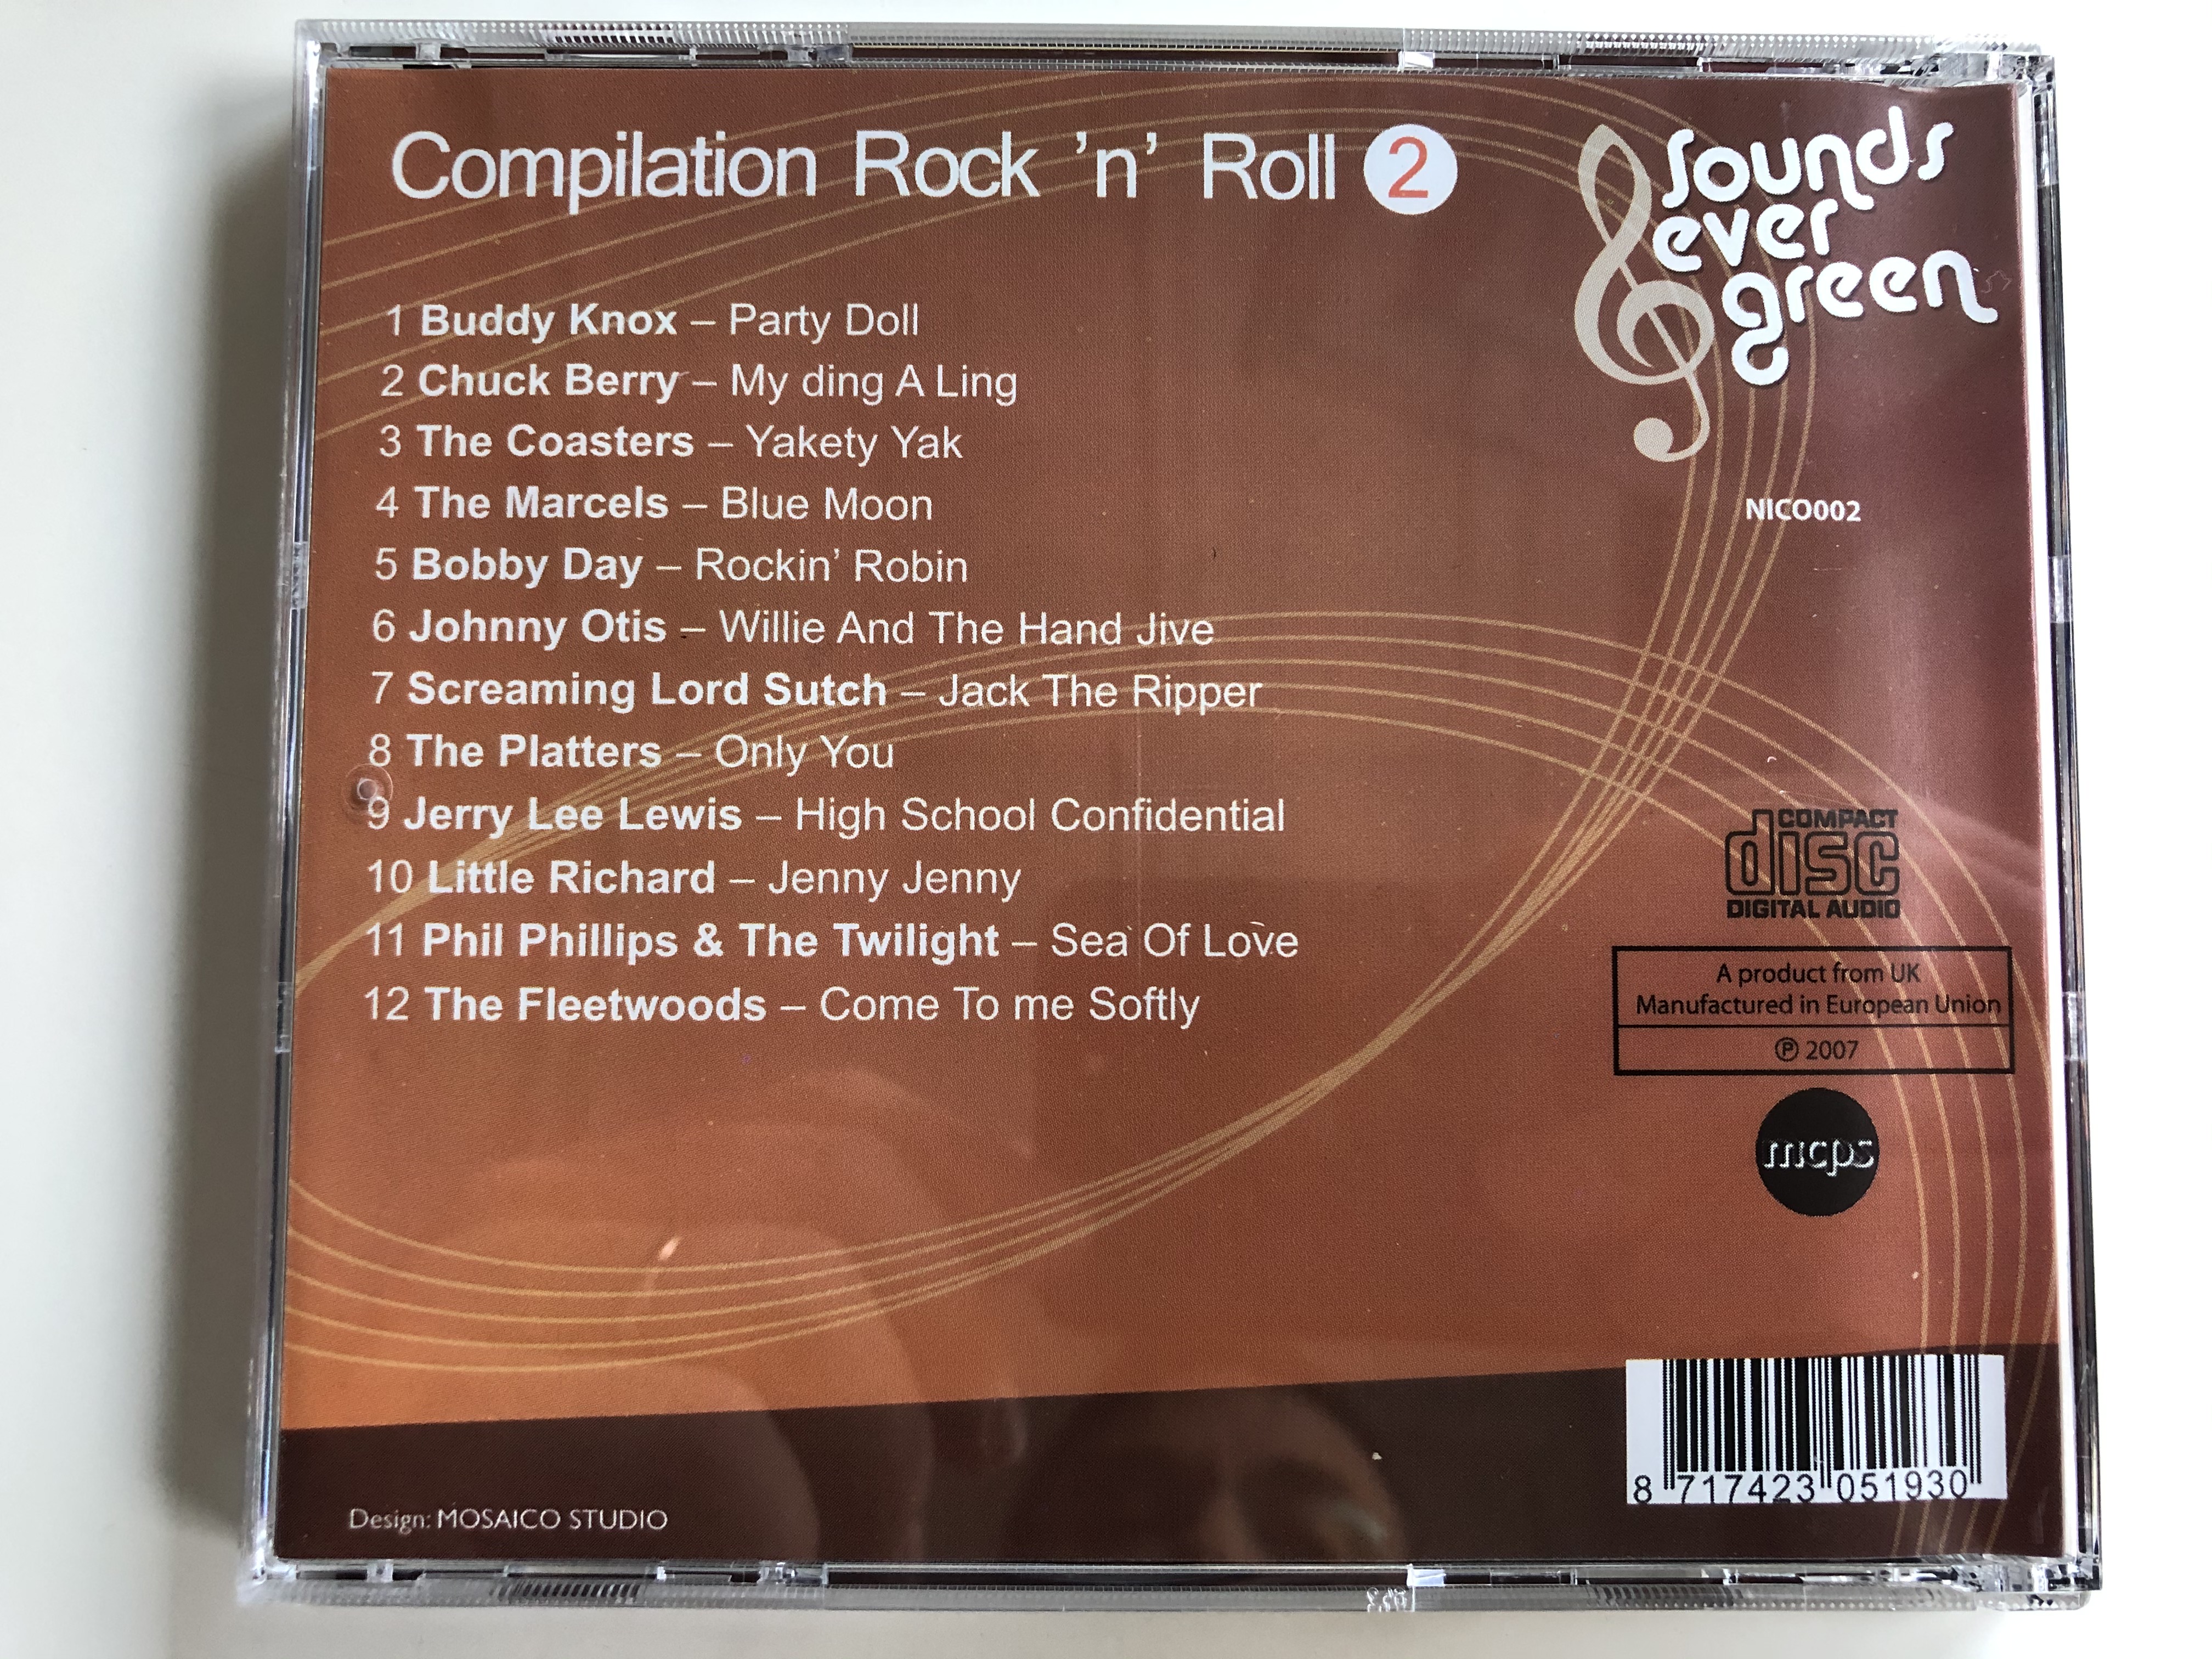 sounds-ever-green-compilation-rock-n-roll-2-sounds-ever-green-audio-cd-2007-nico002-4-.jpg